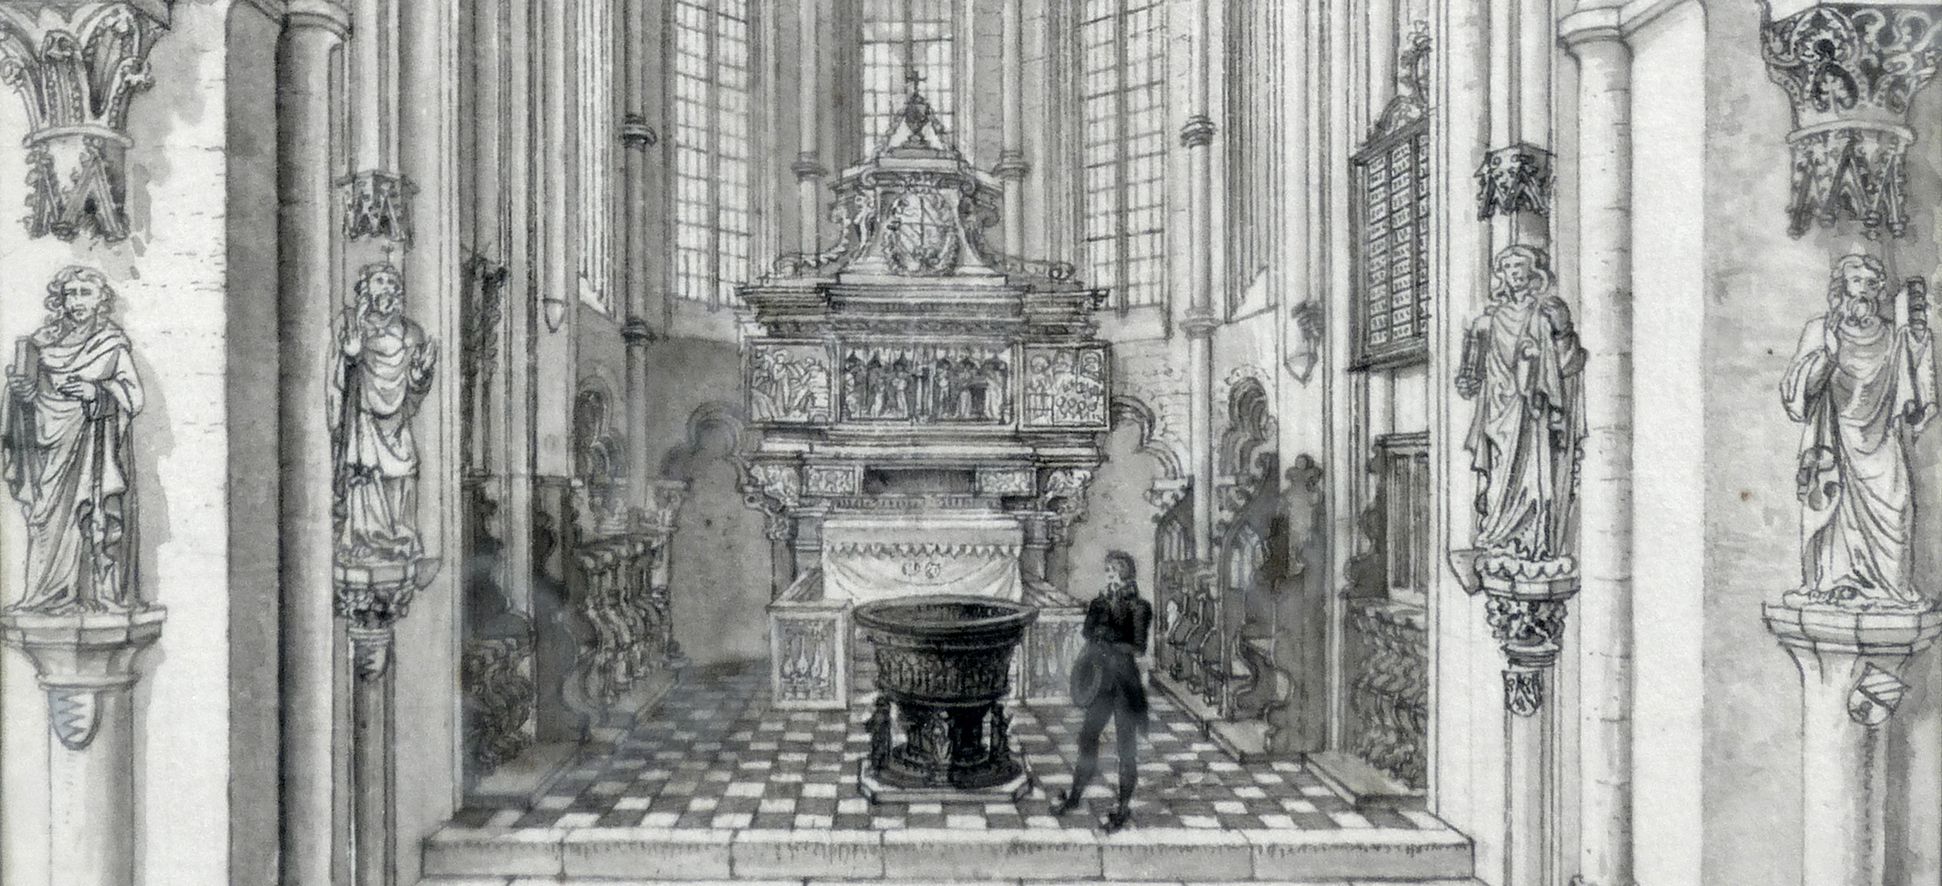 Interior of St. Sebaldus Church in Nuremberg, west choir lower section of the picture